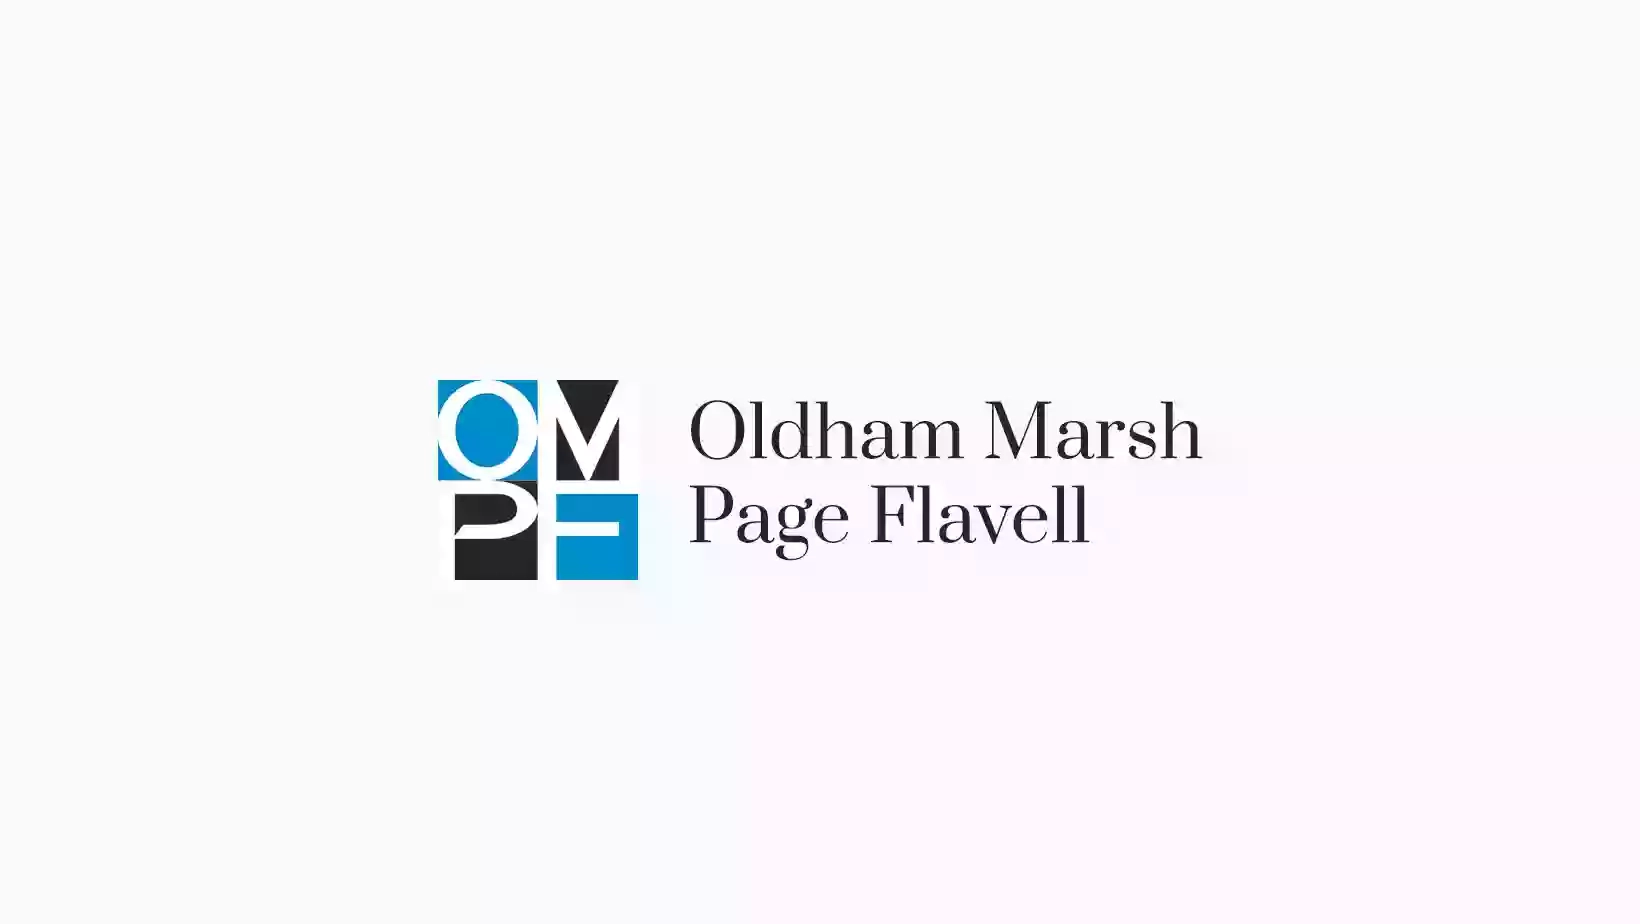 Oldham Marsh Page Flavell